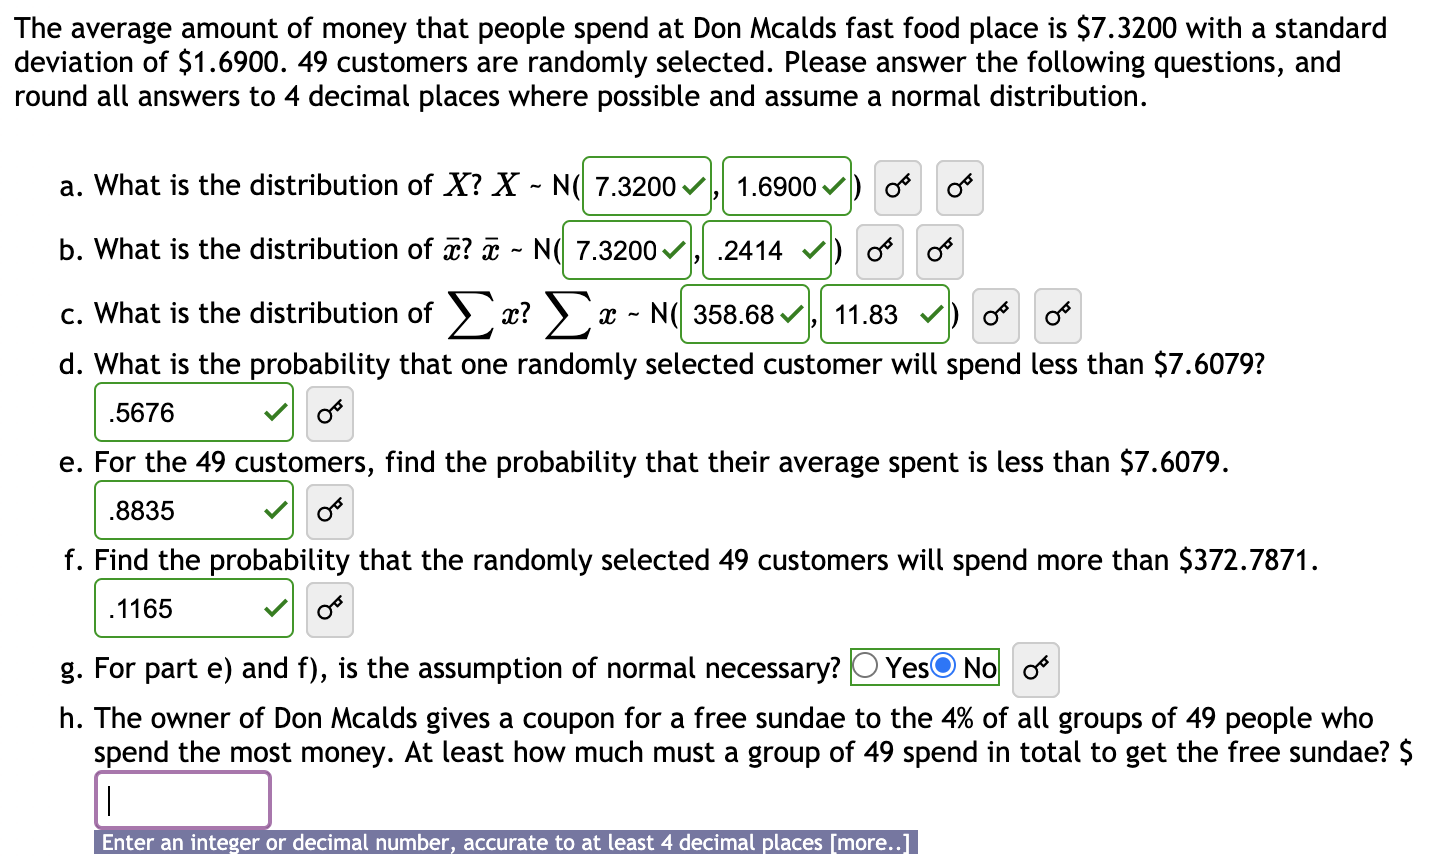 The average amount of money that people spend at Don Mcalds fast food place is $7.3200 with a standard
deviation of $1.6900. 49 customers are randomly selected. Please answer the following questions, and
round all answers to 4 decimal places where possible and assume a normal distribution.
a. What is the distribution of X? X - N( 7.3200 v
1.6900 /
b. What is the distribution of x? ¤ - N( 7.3200
.2414
c. What is the distribution of > x? ) x - N( 358.68 v
11.83 V
d. What is the probability that one randomly selected customer will spend less than $7.6079?
.5676
e. For the 49 customers, find the probability that their average spent is less than $7.6079.
.8835
f. Find the probability that the randomly selected 49 customers will spend more than $372.7871.
.1165
g. For part e) and f), is the assumption of normal necessary?
YesO No o
h. The owner of Don Mcalds gives a coupon for a free sundae to the 4% of all groups of 49 people who
spend the most money. At least how much must a group of 49 spend in total to get the free sundae? $
Enter an integer or decimal number, accurate to at least 4 decimal places [more..]
